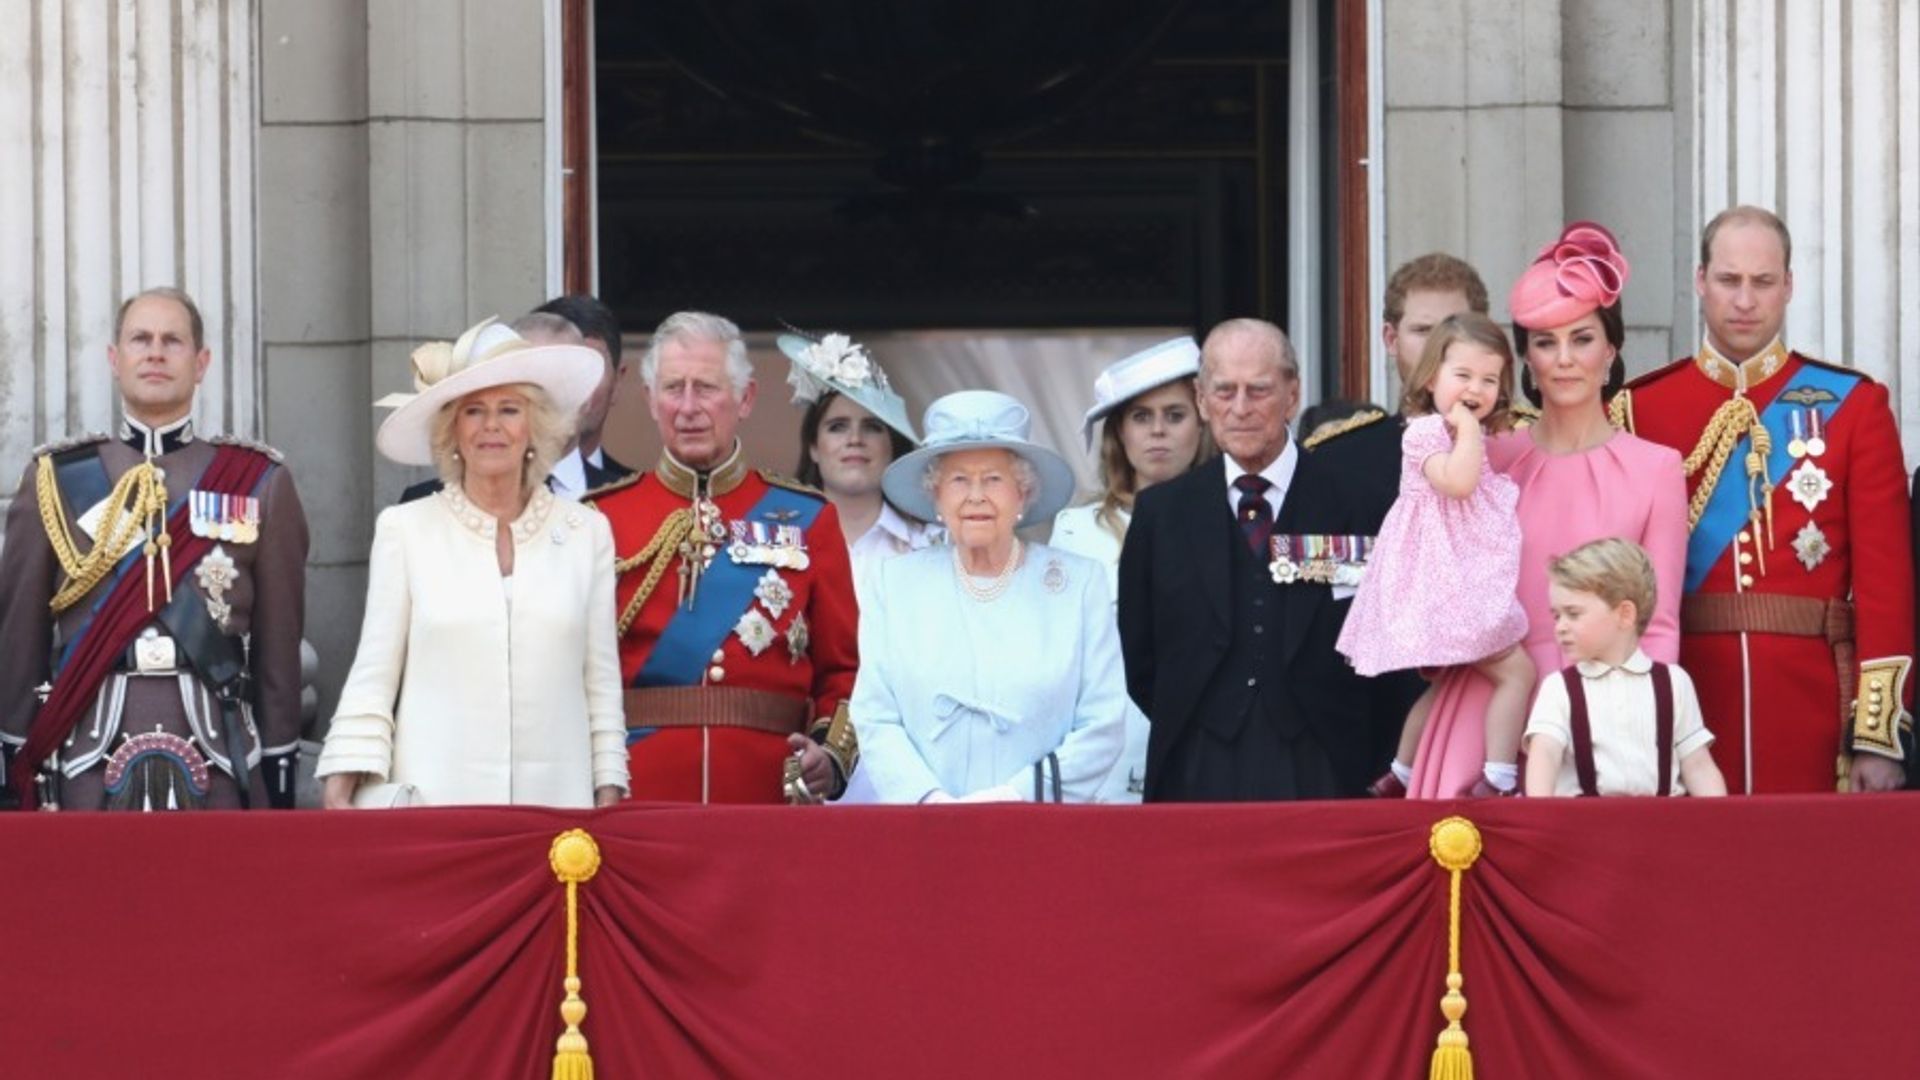 Trooping the Colour 2017: Prince George and Princess Charlotte take centerstage along with the British royals